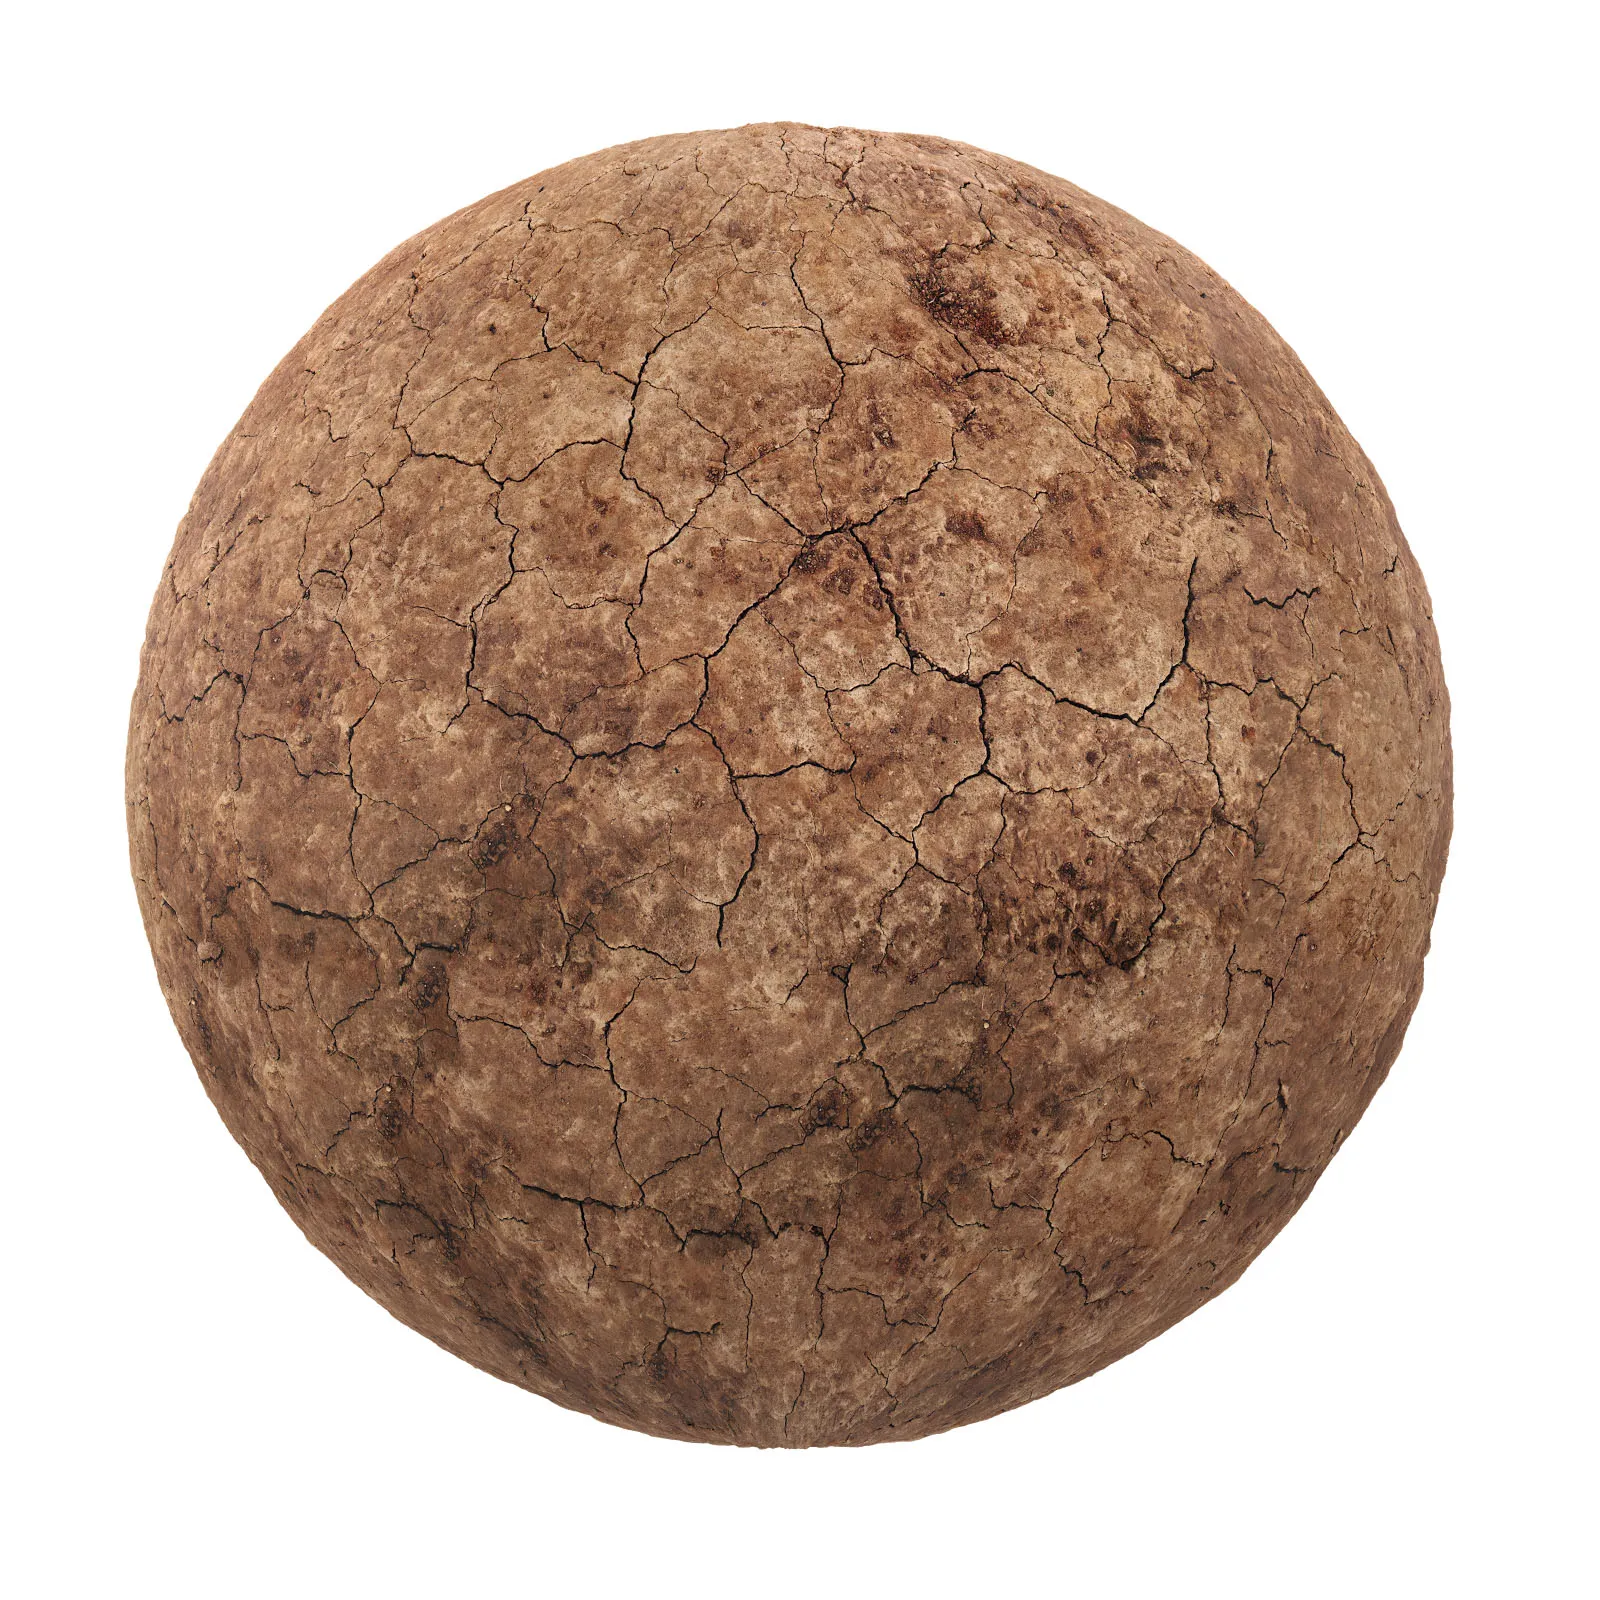 PBR CGAXIS TEXTURES – SOIL – Brown Dry Mud